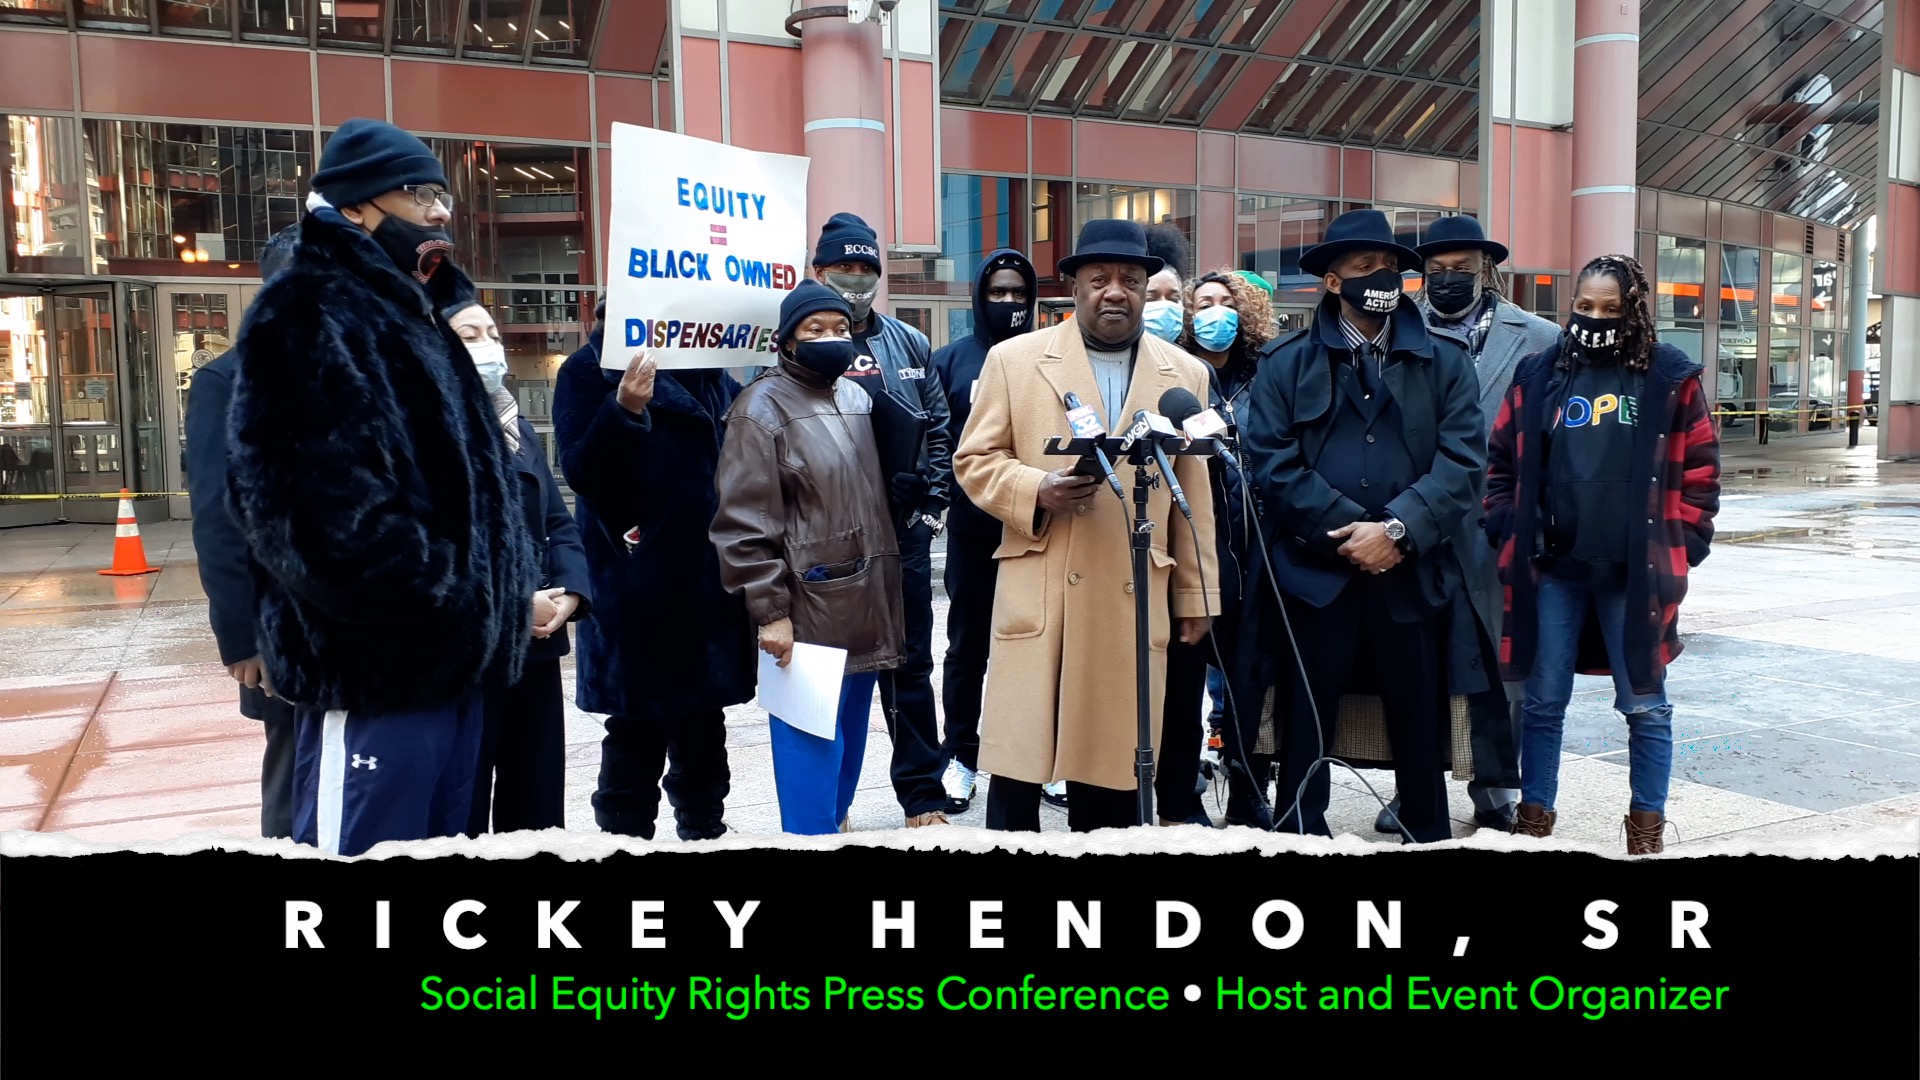 Chicago Social Equity Rights Press Conference 02-23-2021 (Full)